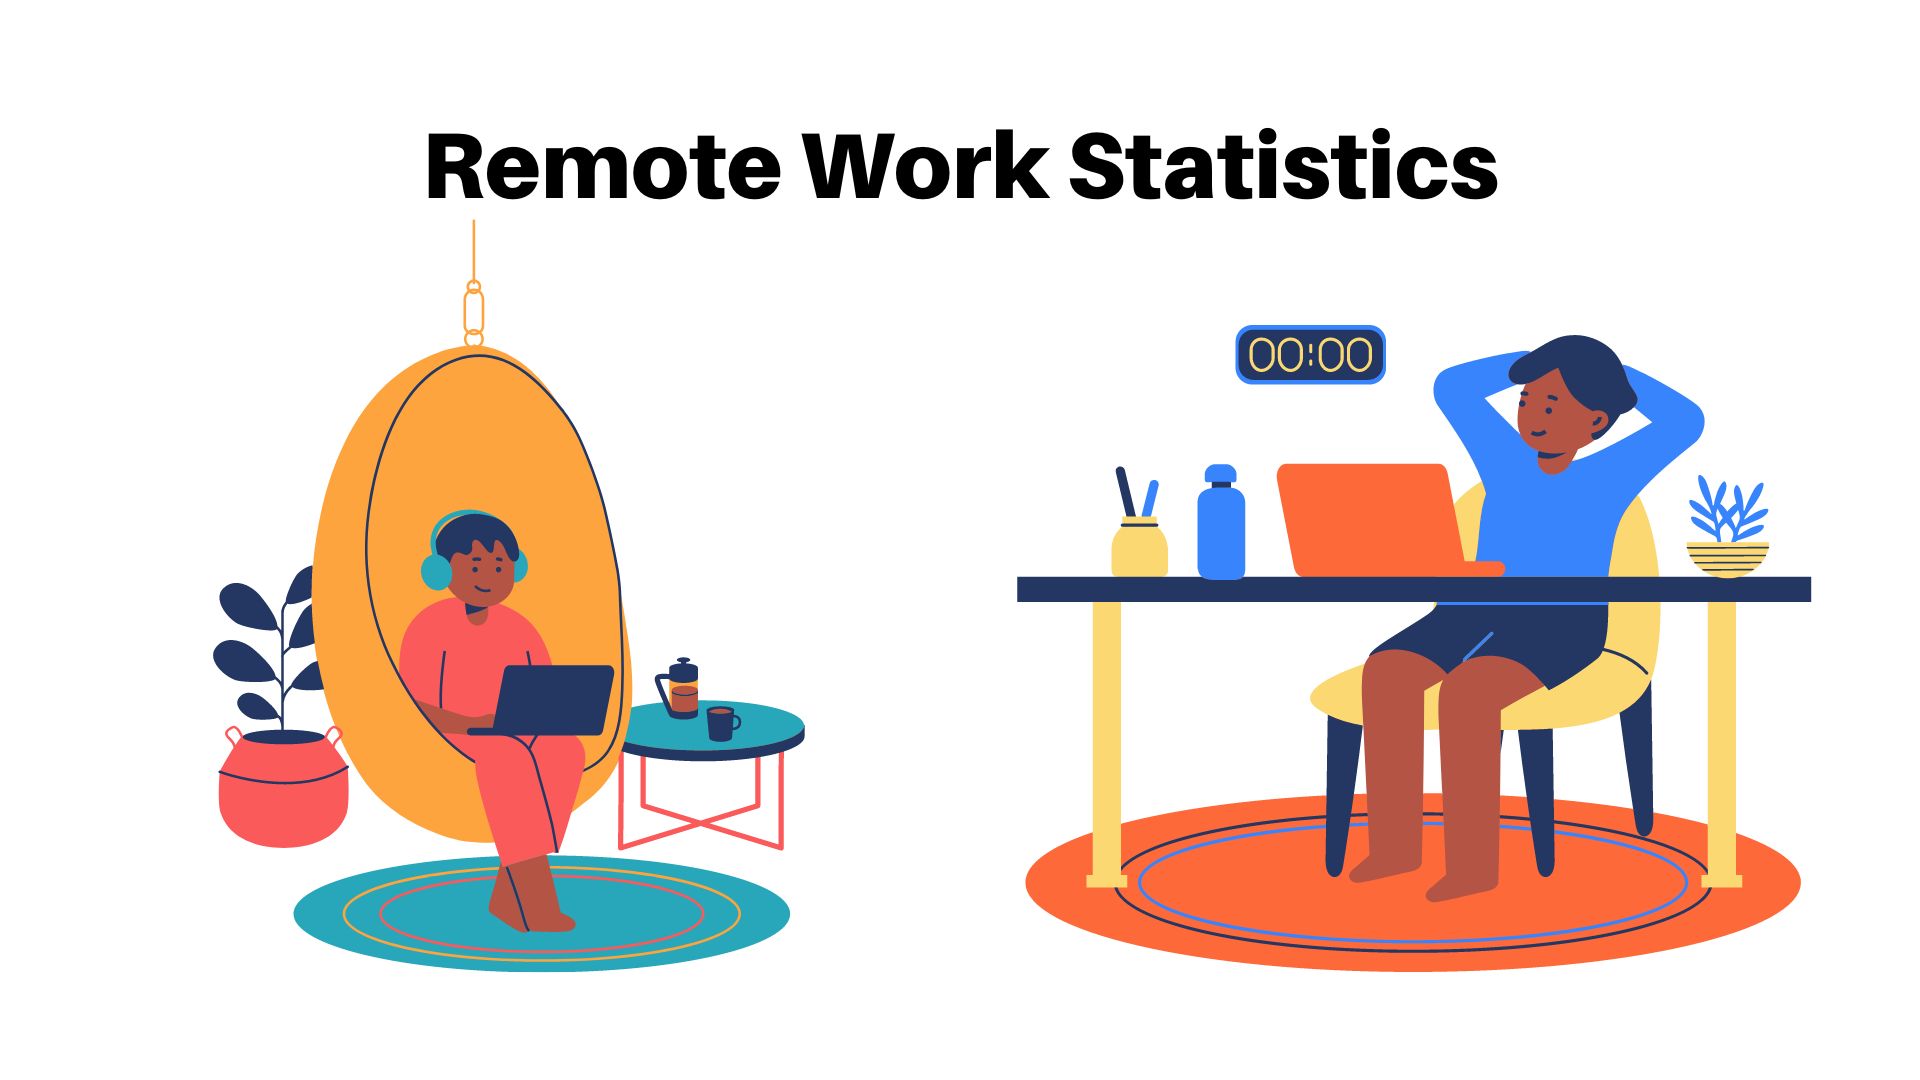 Remote Work Statistics – By Region, Industry, Benefits, Demographics, Working Location and Influential Factors